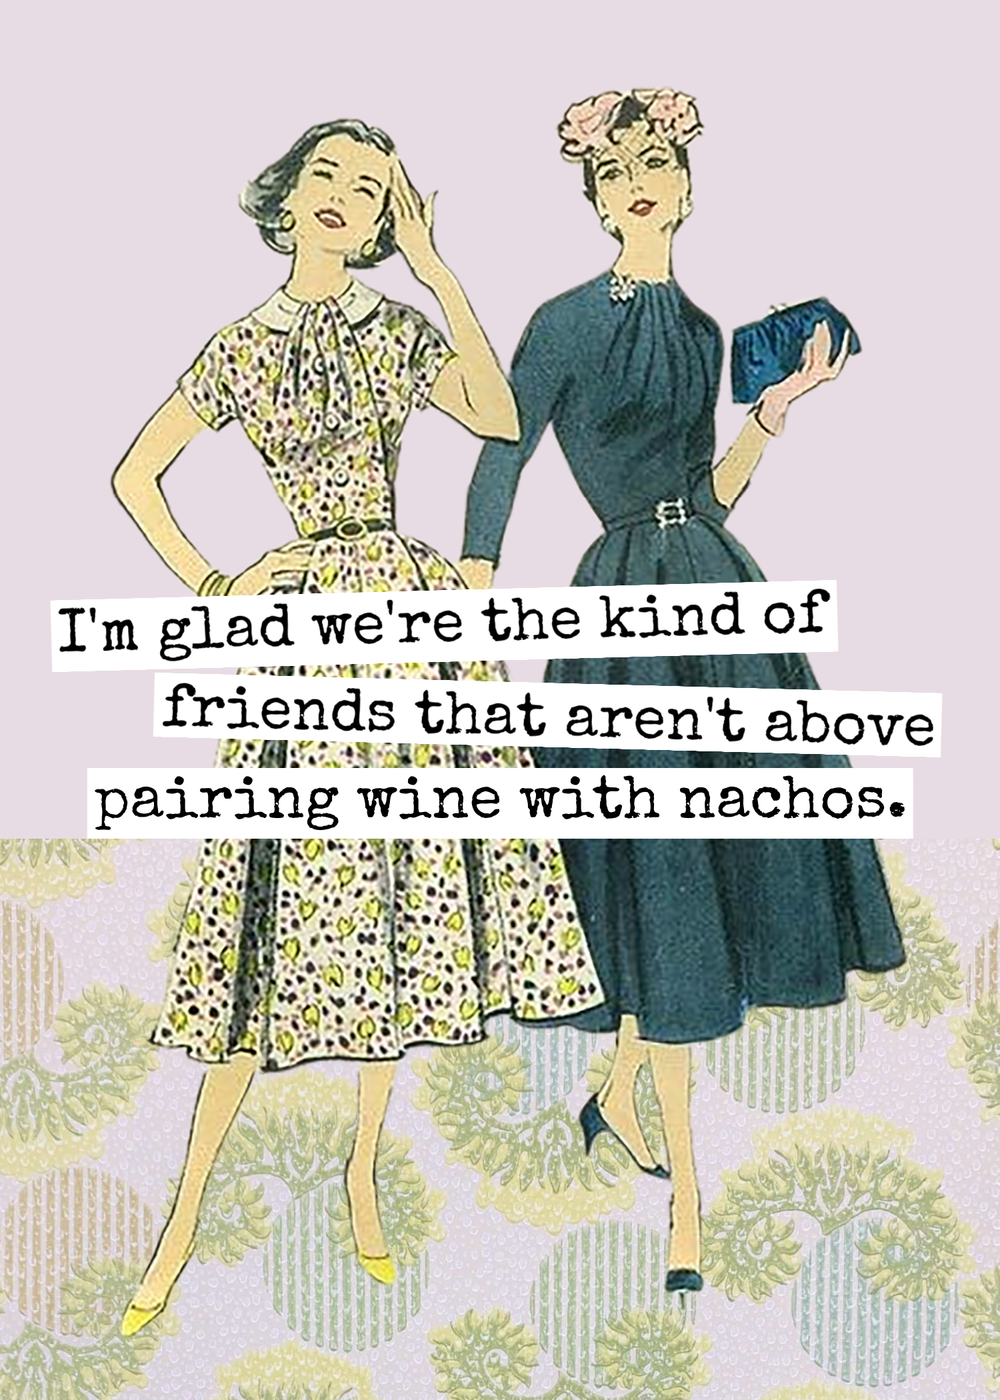 Funny Greeting Card. Friends Pairing Wine With Nachos.